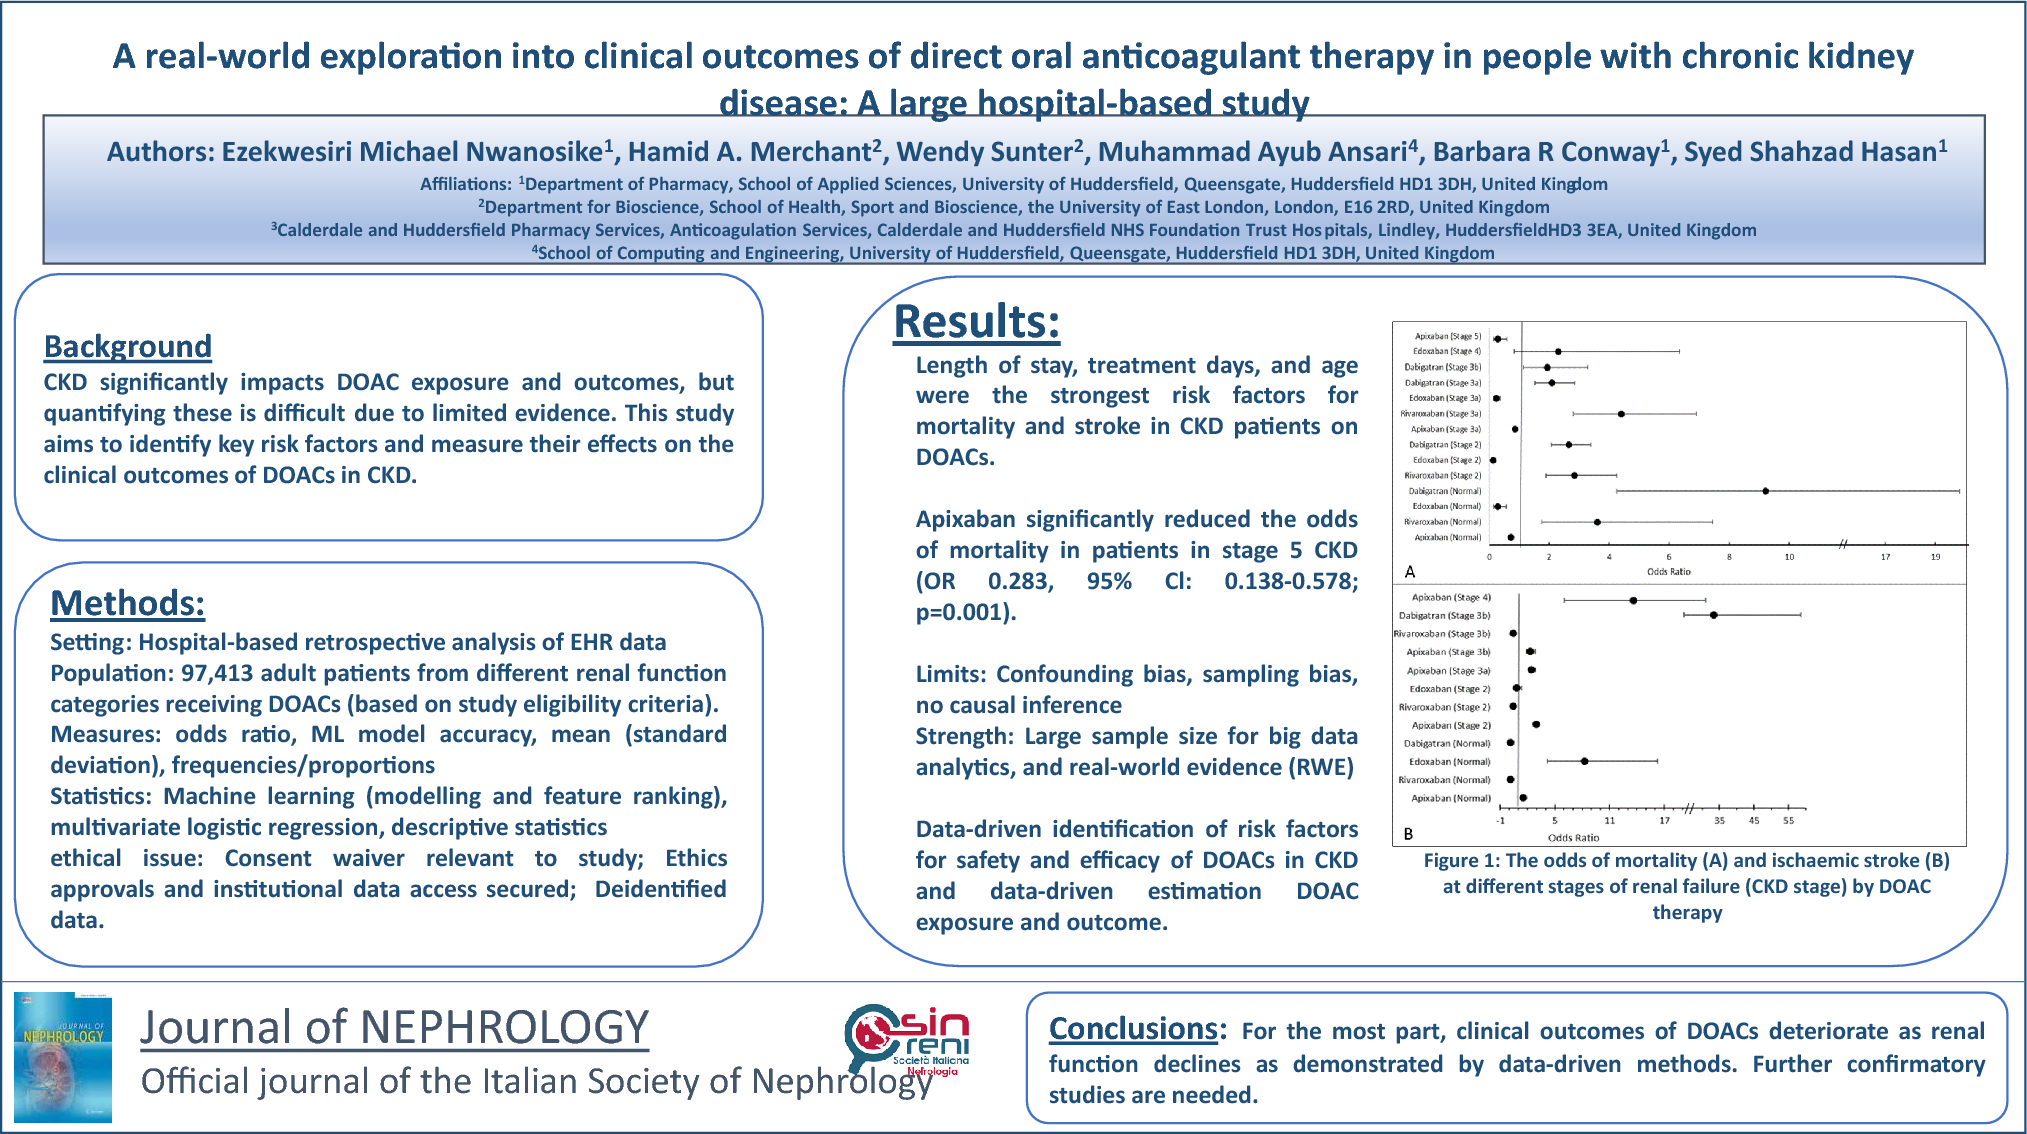 A real-world exploration into clinical outcomes of direct oral anticoagulant therapy in people with chronic kidney disease: a large hospital-based study